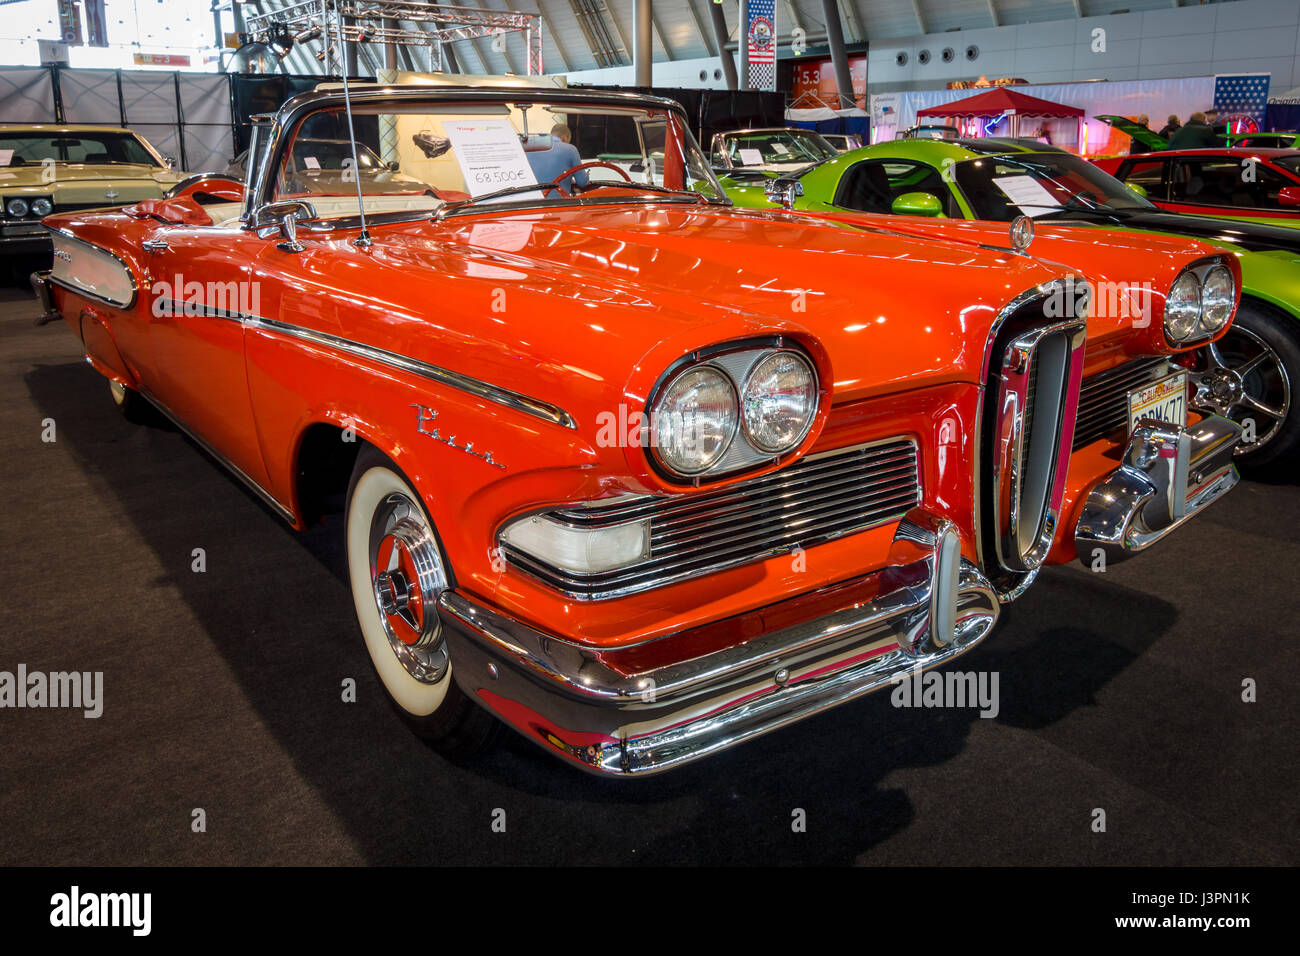 STUTTGART, GERMANY - MARCH 03, 2017: Full-size car Edsel Pacer Convertible, 1958. Europe's greatest classic car exhibition 'RETRO CLASSICS' Stock Photo